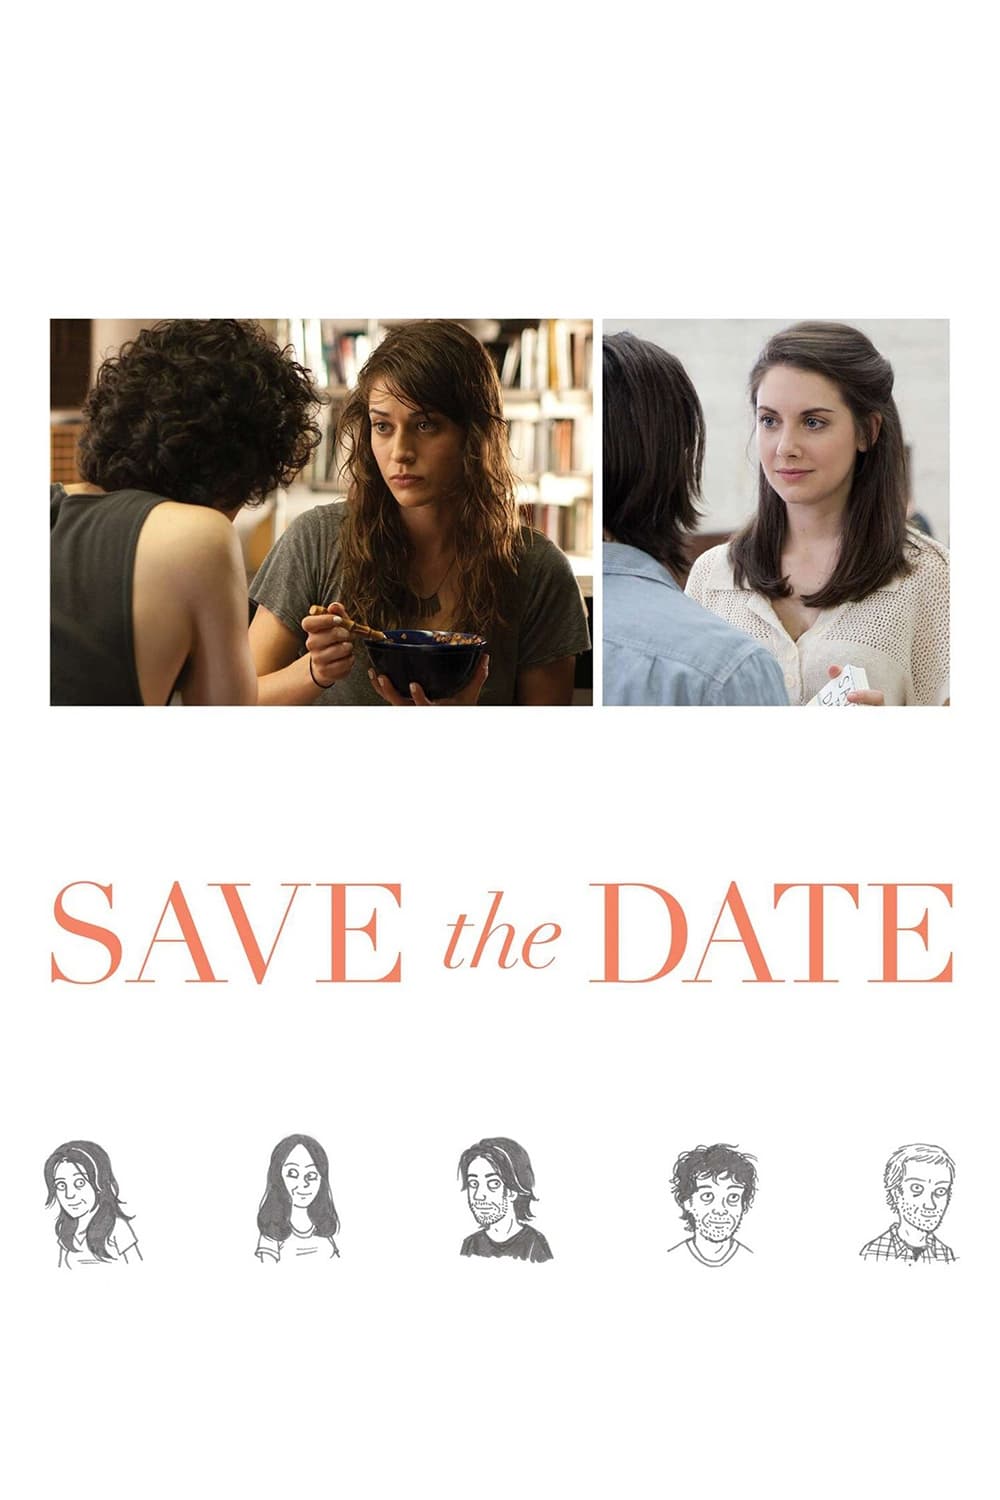 Save the Date film